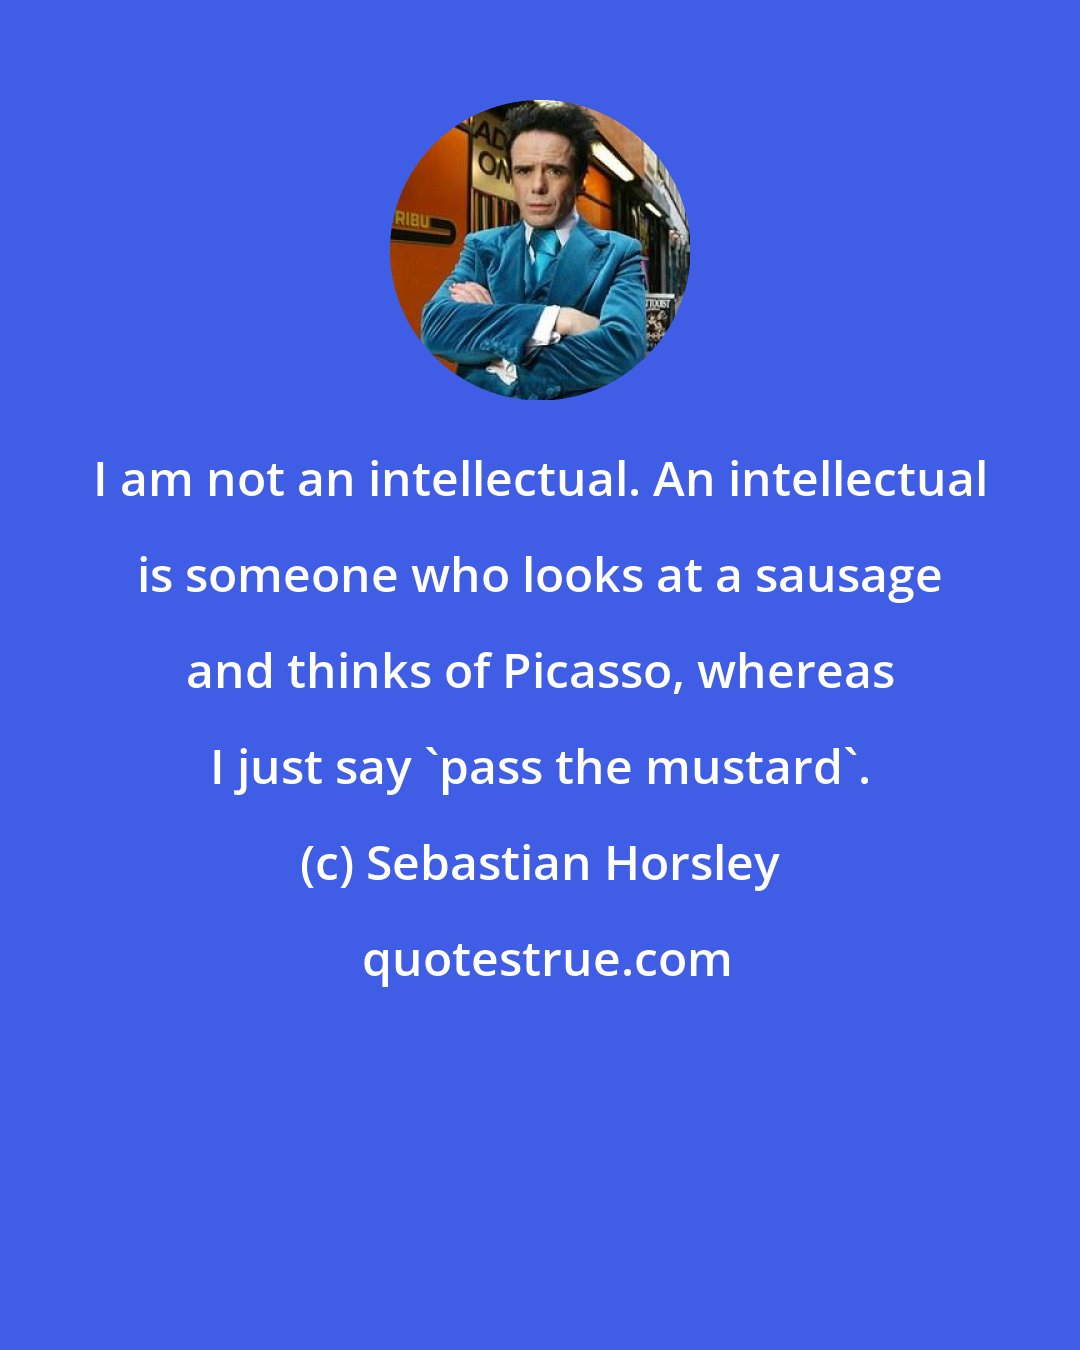 Sebastian Horsley: I am not an intellectual. An intellectual is someone who looks at a sausage and thinks of Picasso, whereas I just say 'pass the mustard'.